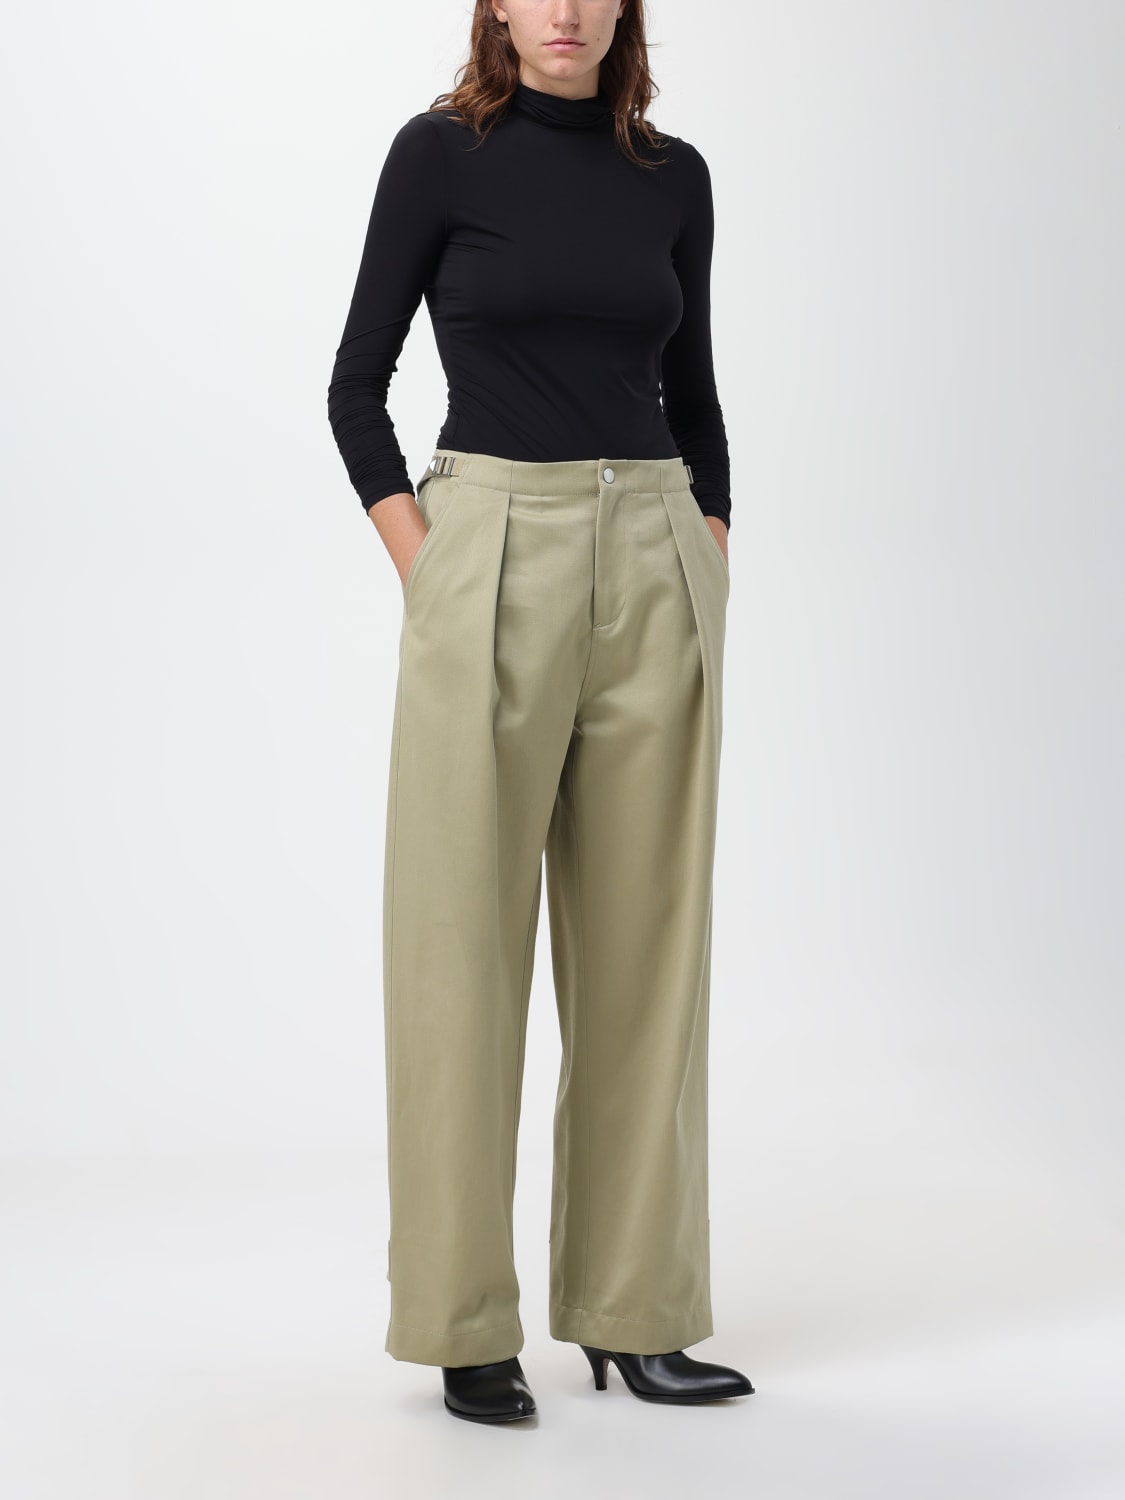 Burberry pants in cotton satin